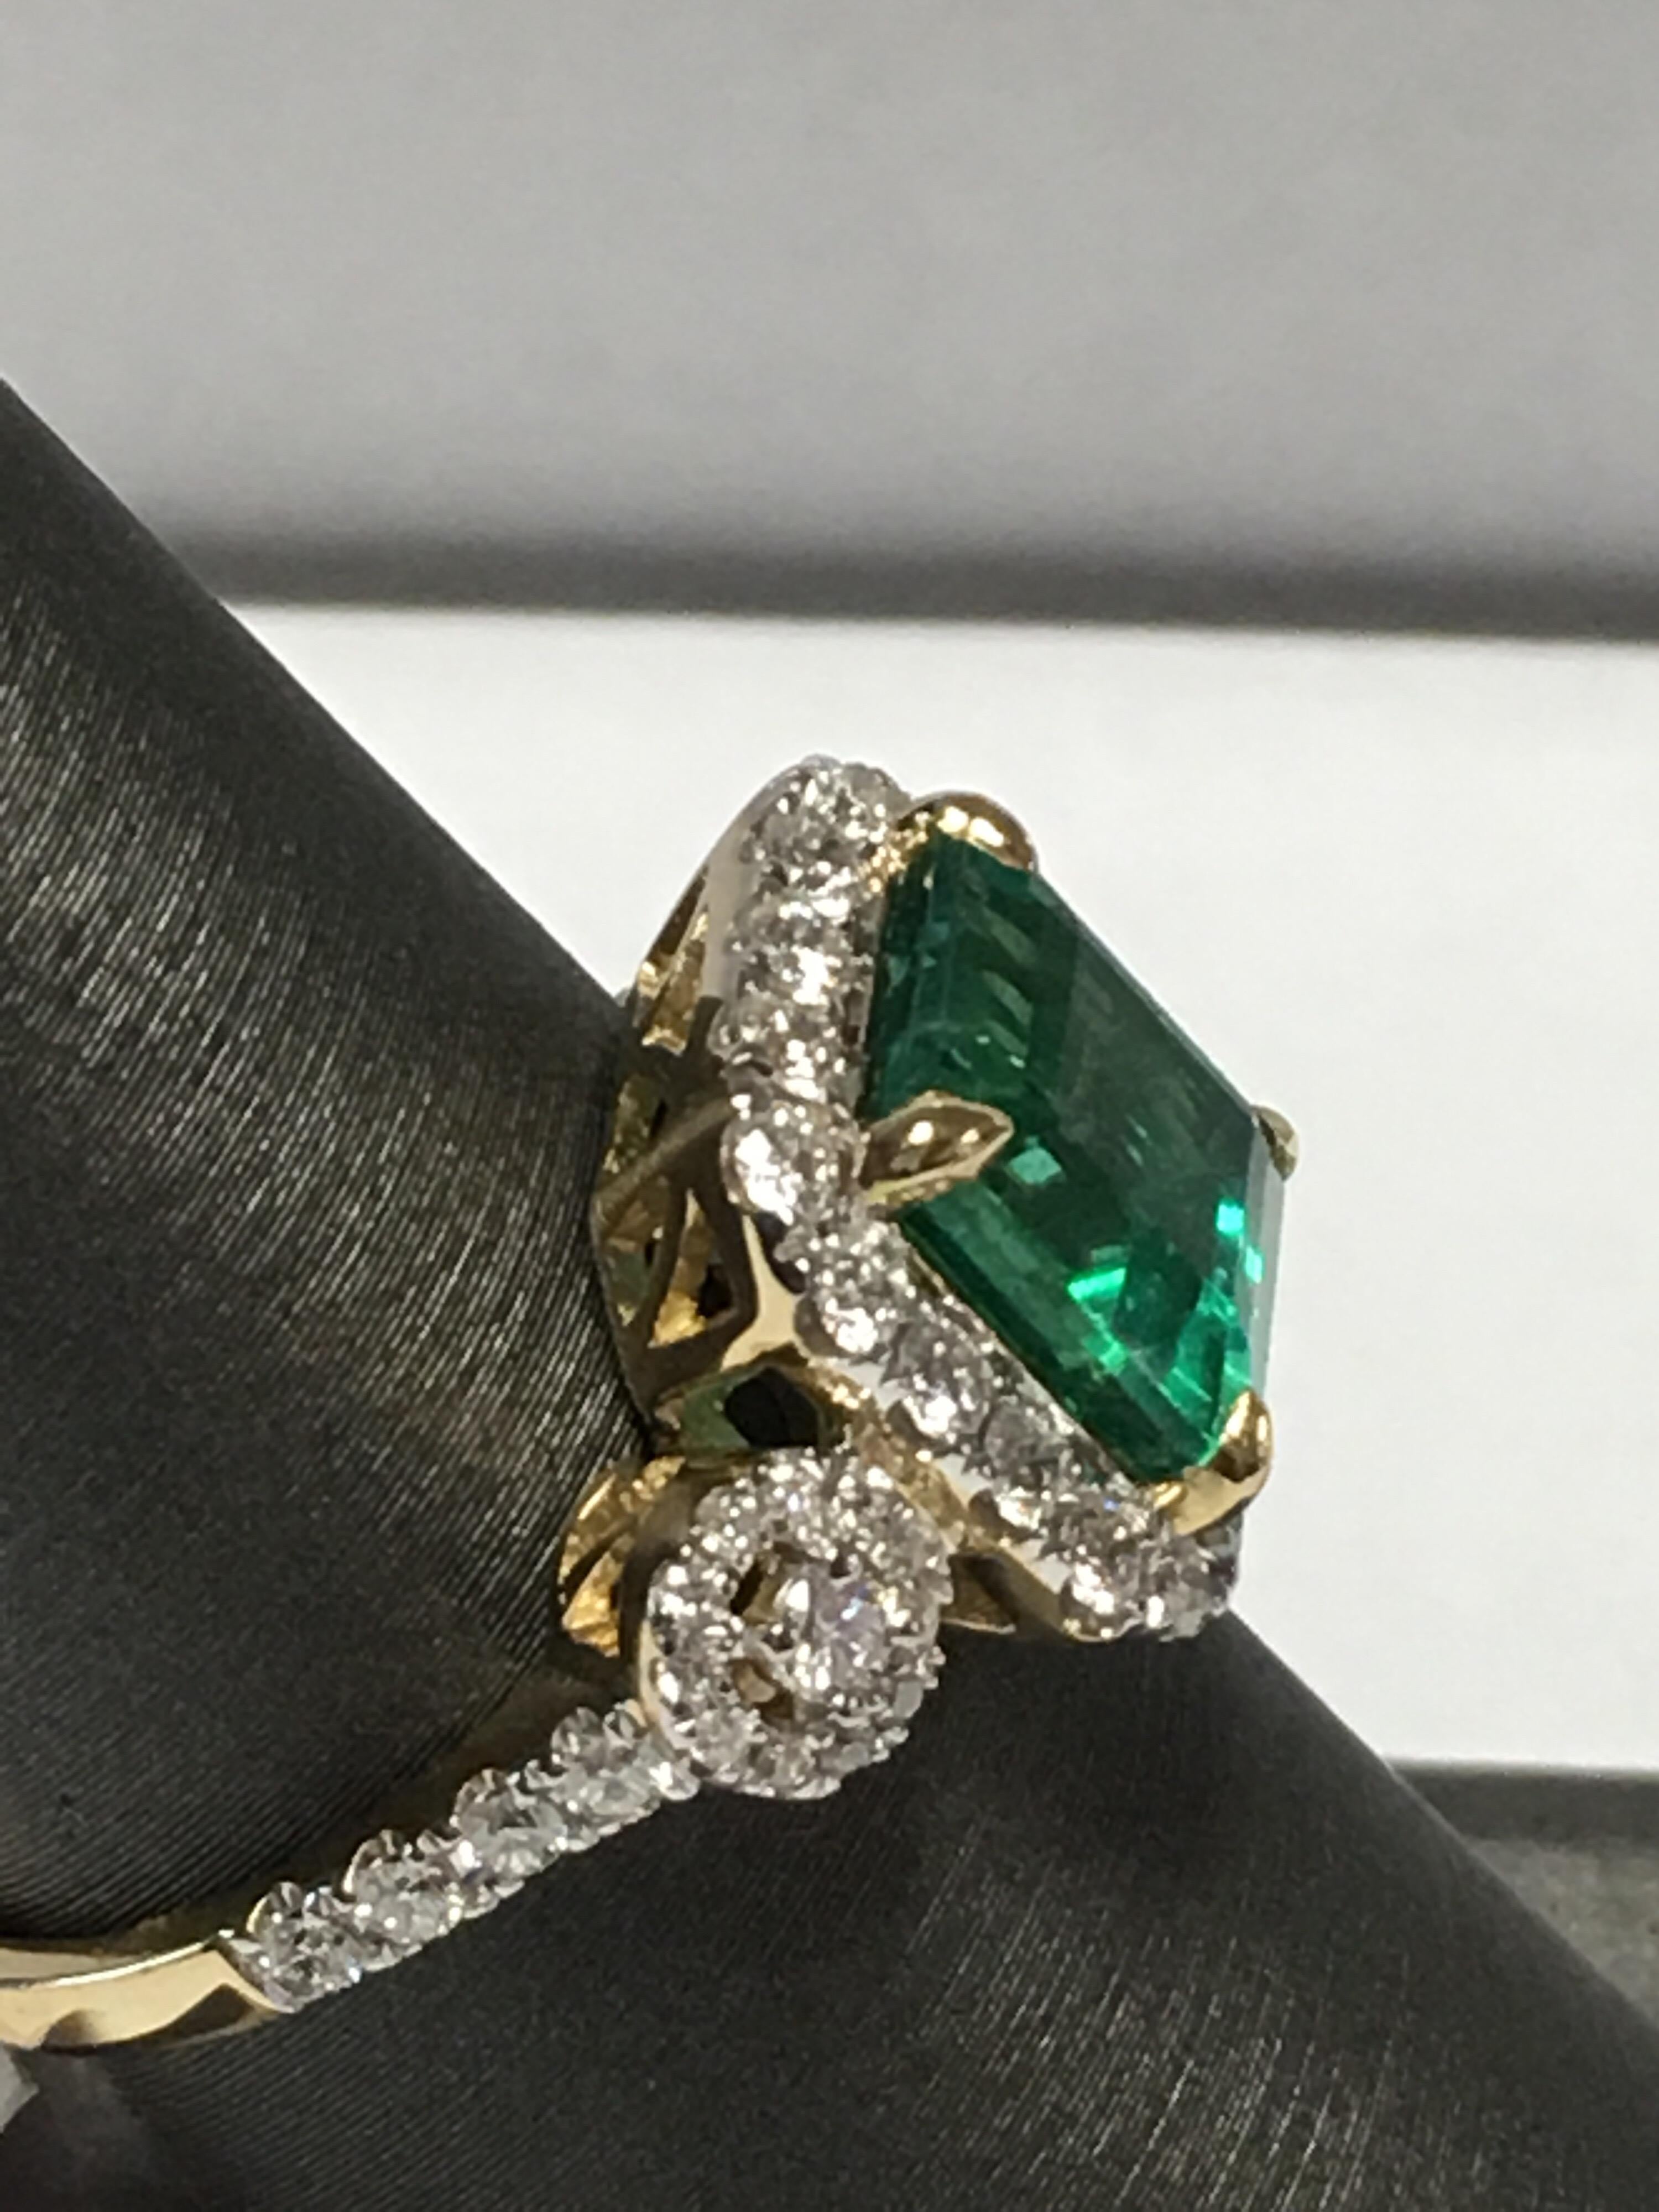 Emerald and diamonds ring set in 14K Yellow gold .Emerald weigh 3.15CTS and 0.78 CTS White round diamonds E color VVS 2 diamonds. Ring size is 7